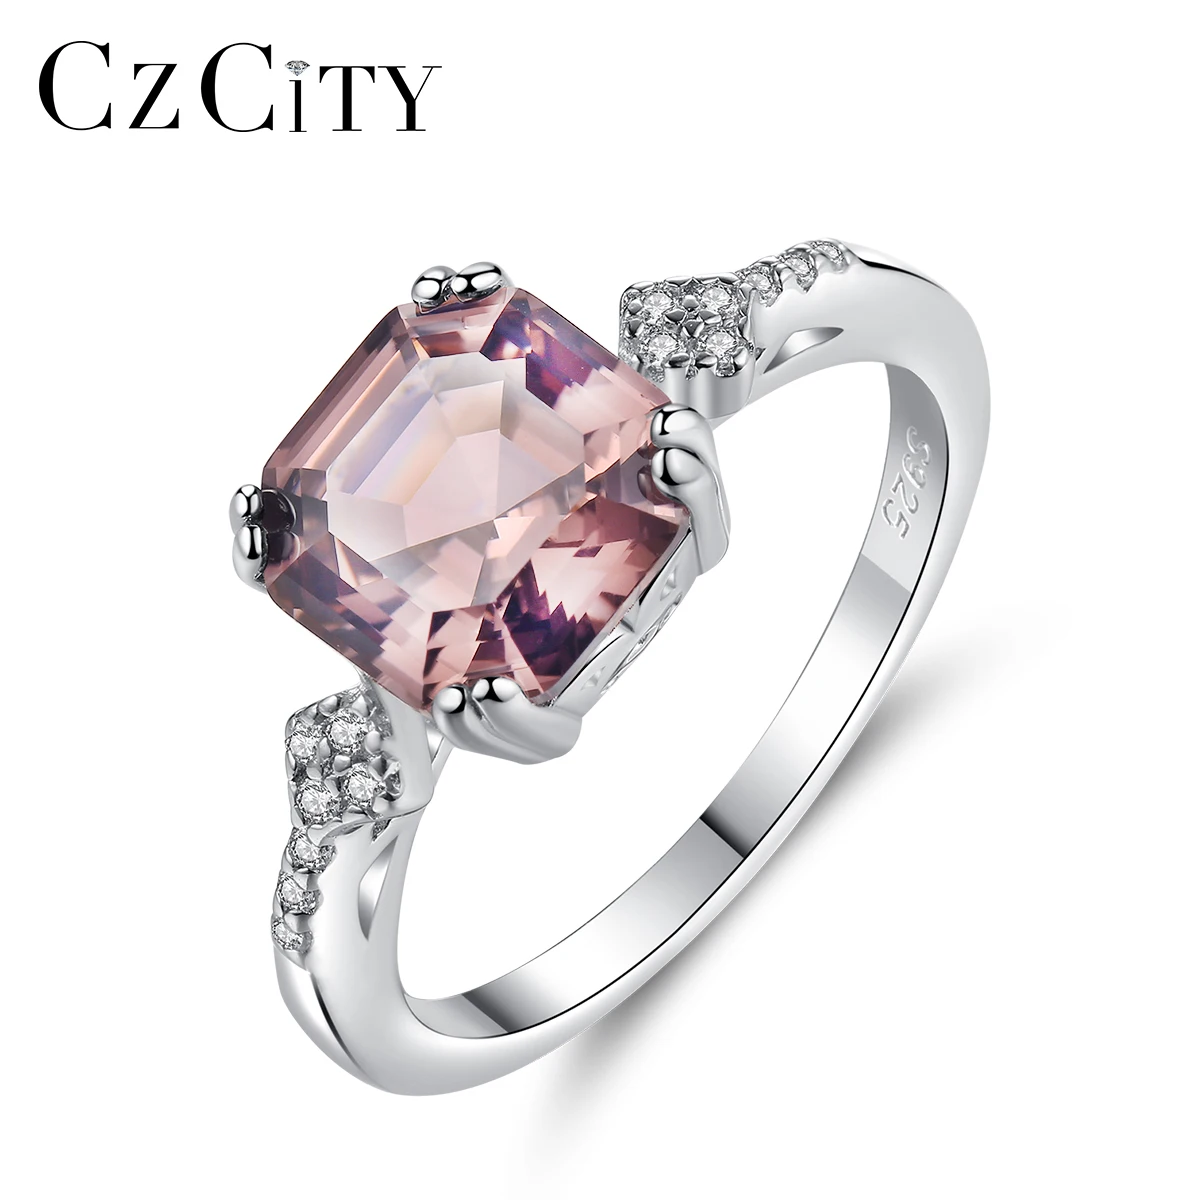 

CZCITY Brand 925 Silver Sterling Finger Rings for Women Created Morganite Carving S925 Luxury Girl Wedding Bridal Jewelry